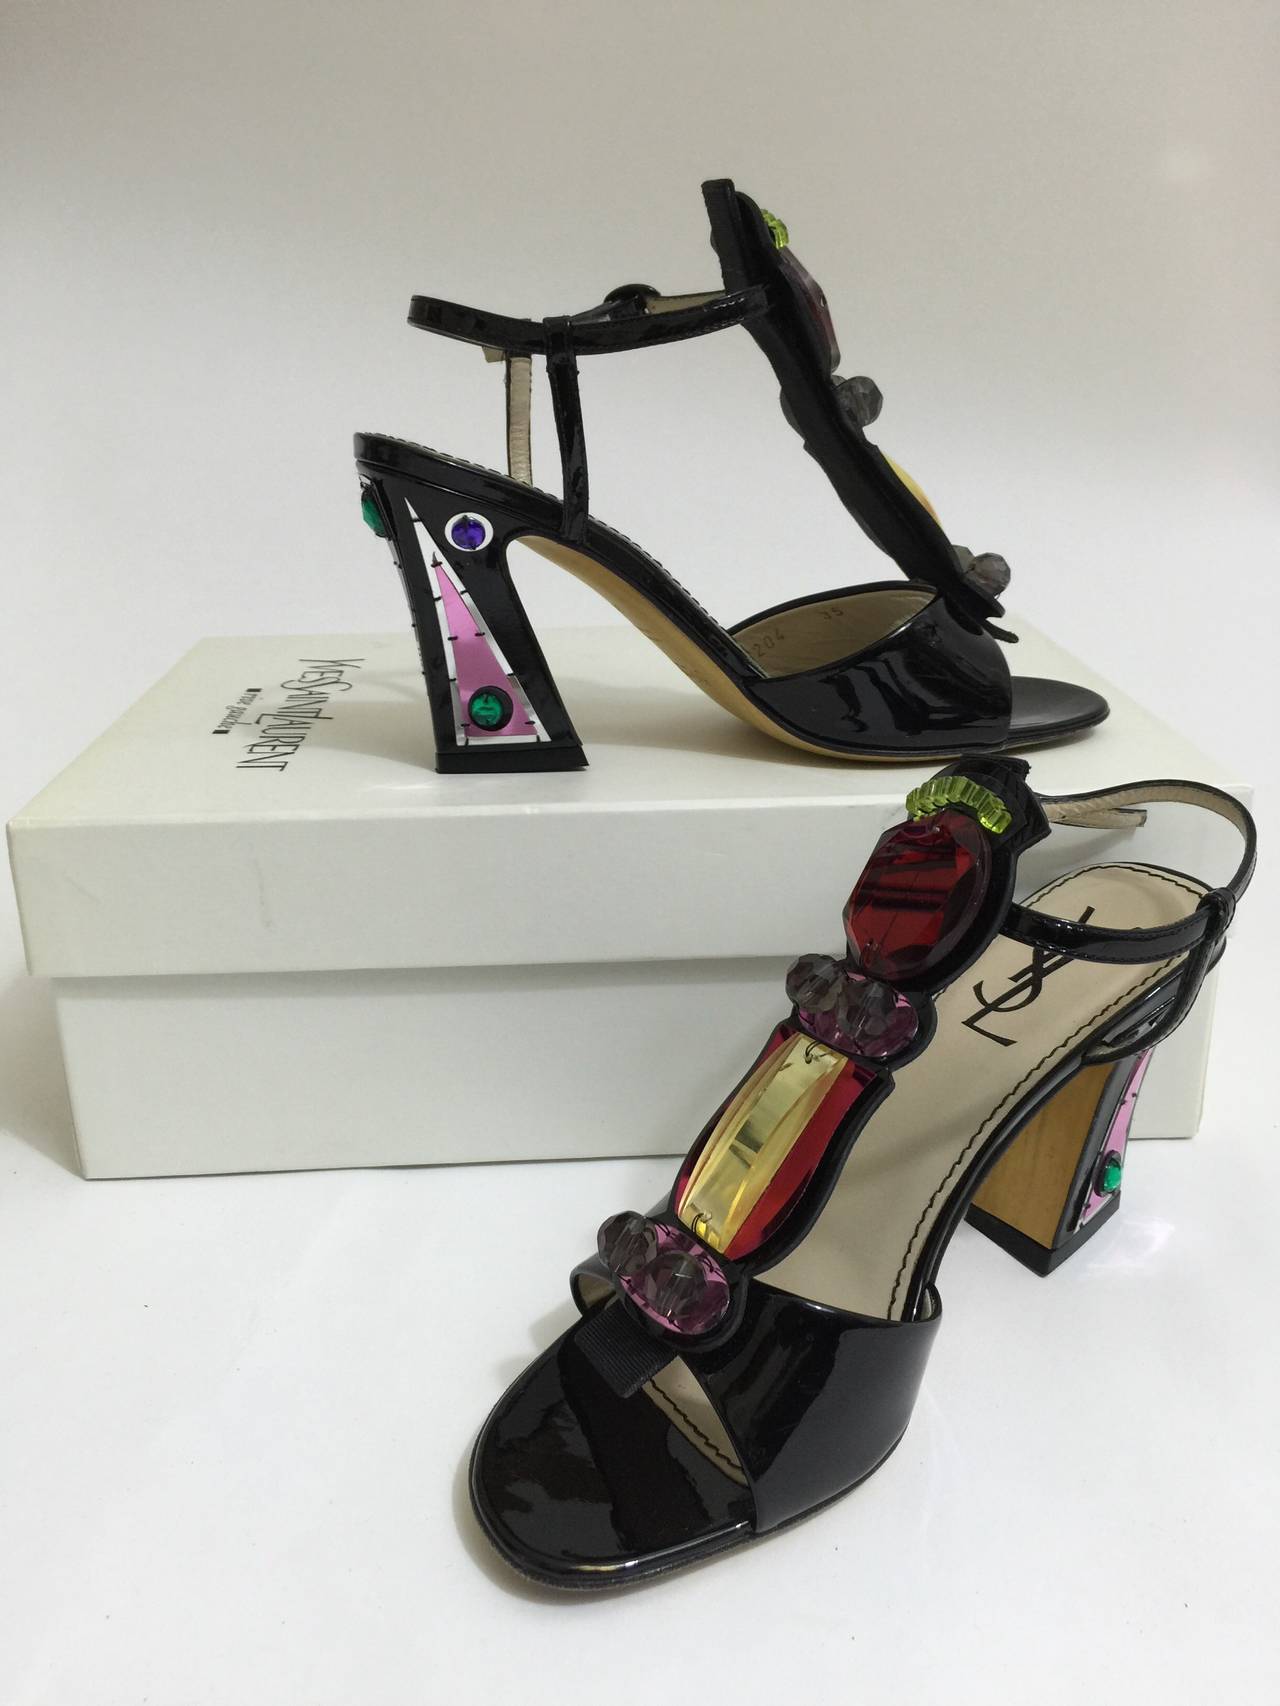 A Gorgeous pair of black patent leather T-strap sandal with jeweled details in plexi and sequins. From the spring 2008 collection
Gently worn
4 heel. 
size: 35/5
Made in Italy